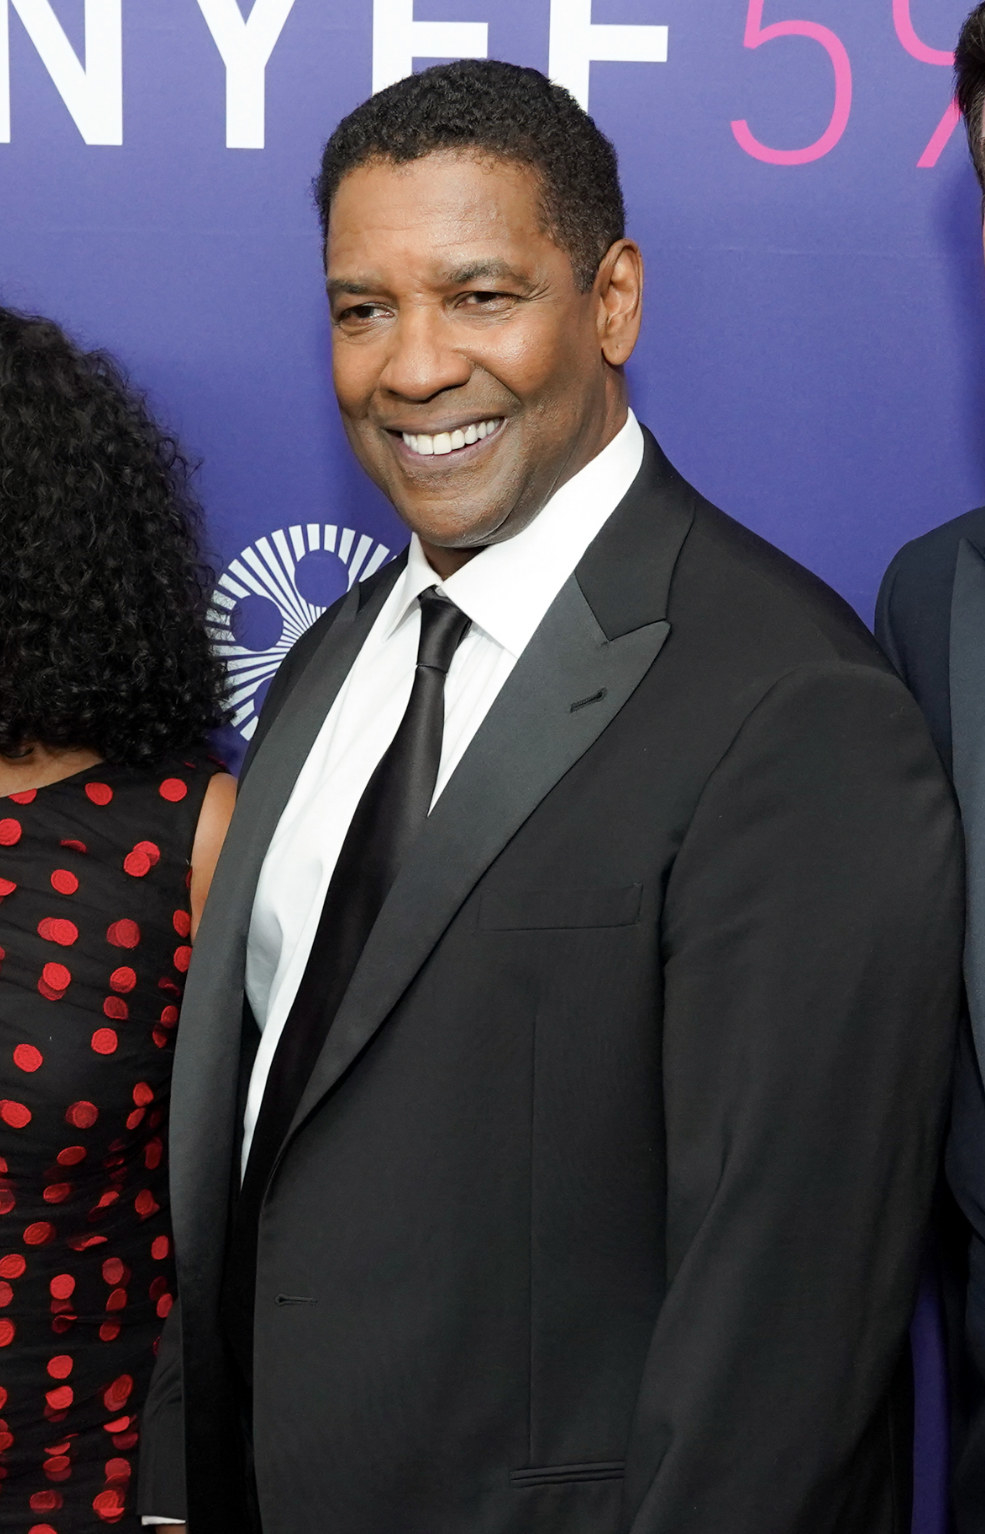 Denzel smiling at the 59th New York Film Festival Opening Night at Lincoln Center